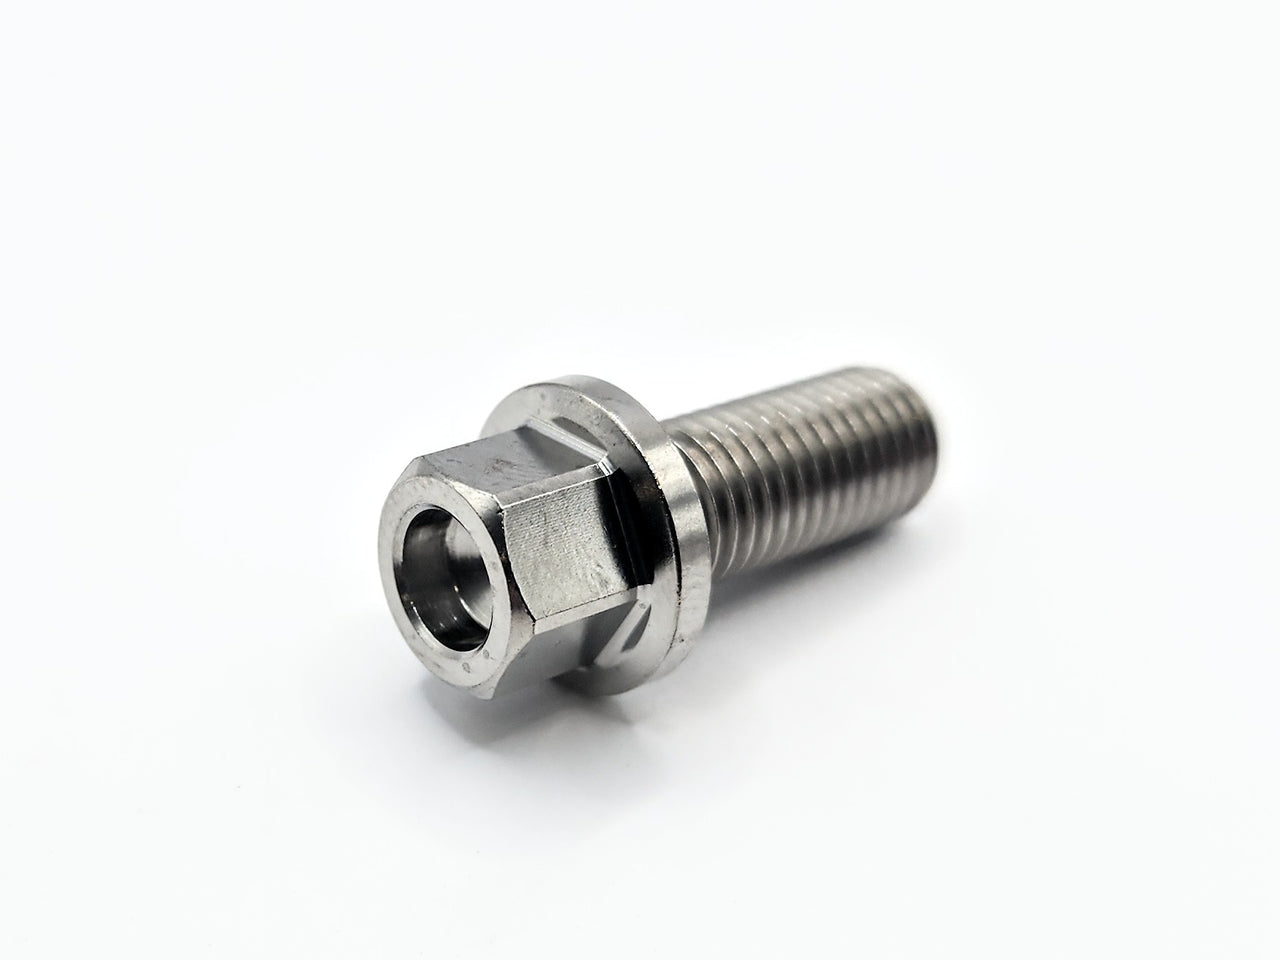 5/16 UNF .750" Reduced Hex Bolt